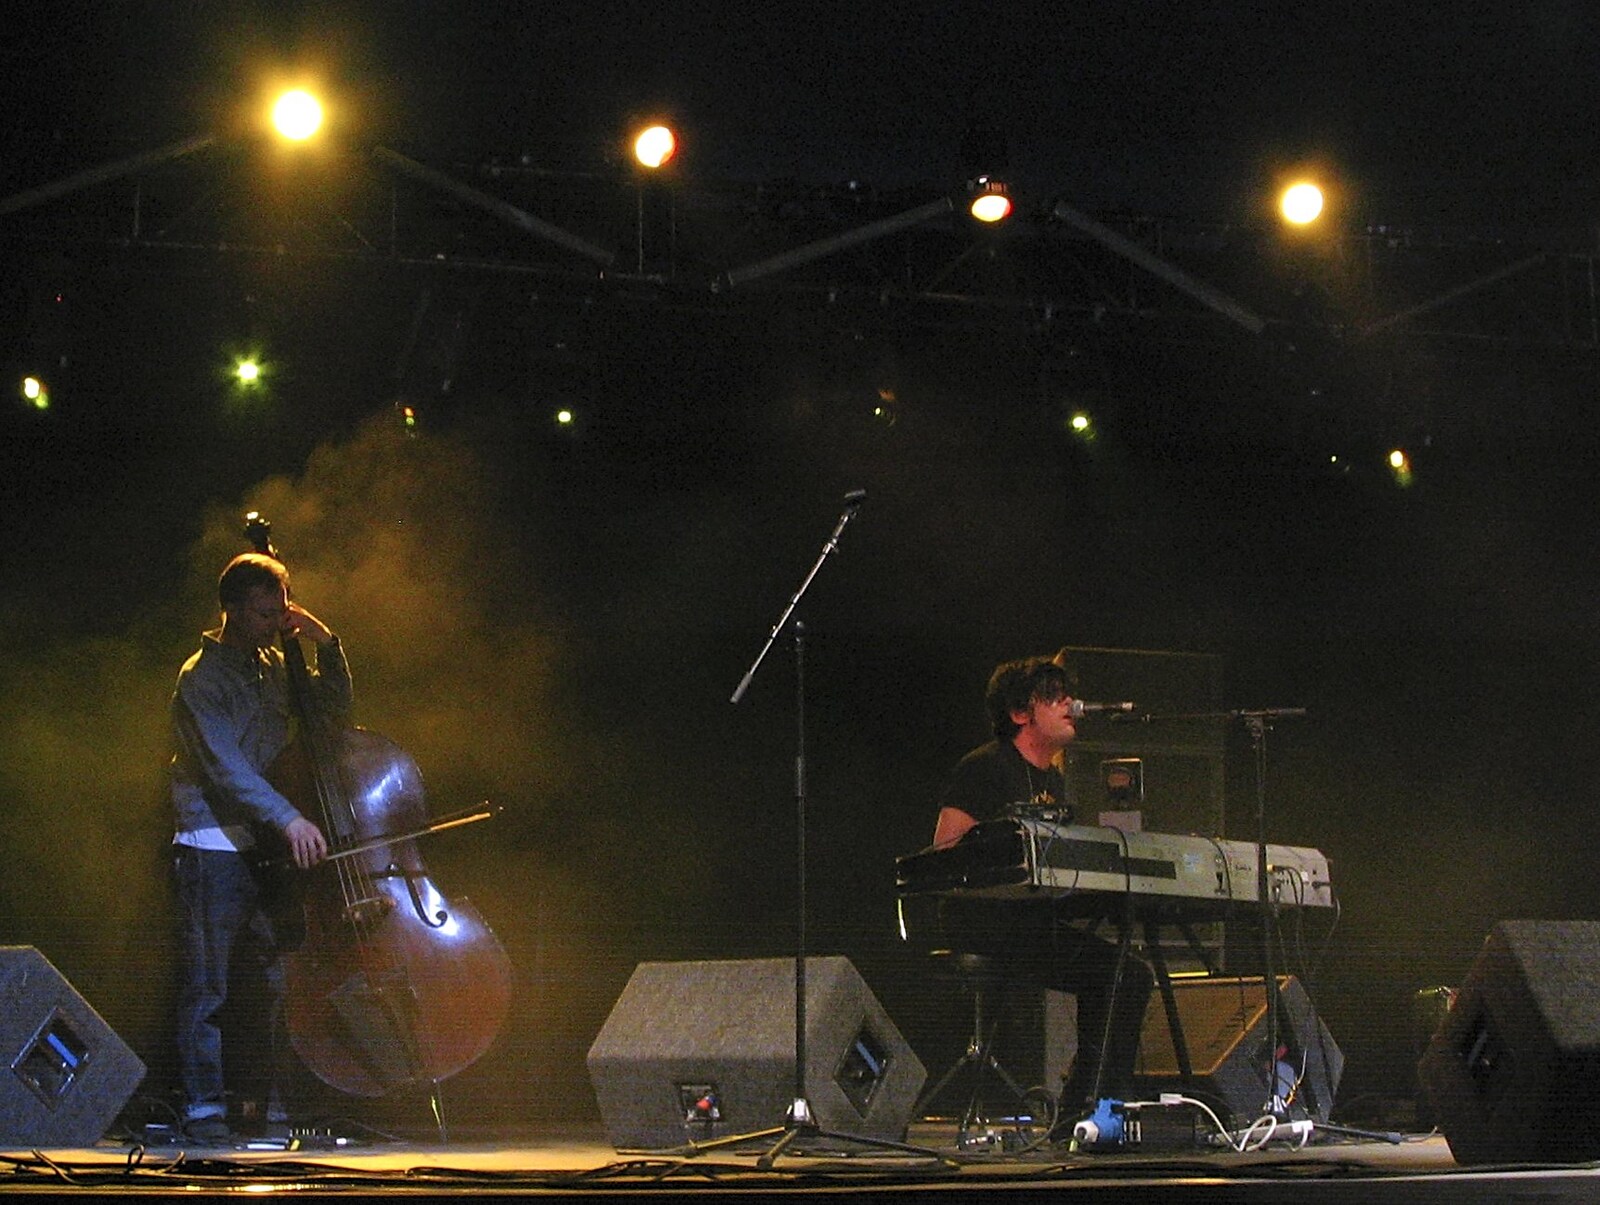 Ed Harcourt and his double-bassist from The First Latitude Festival, Henham Park, Suffolk - 14th July 2006